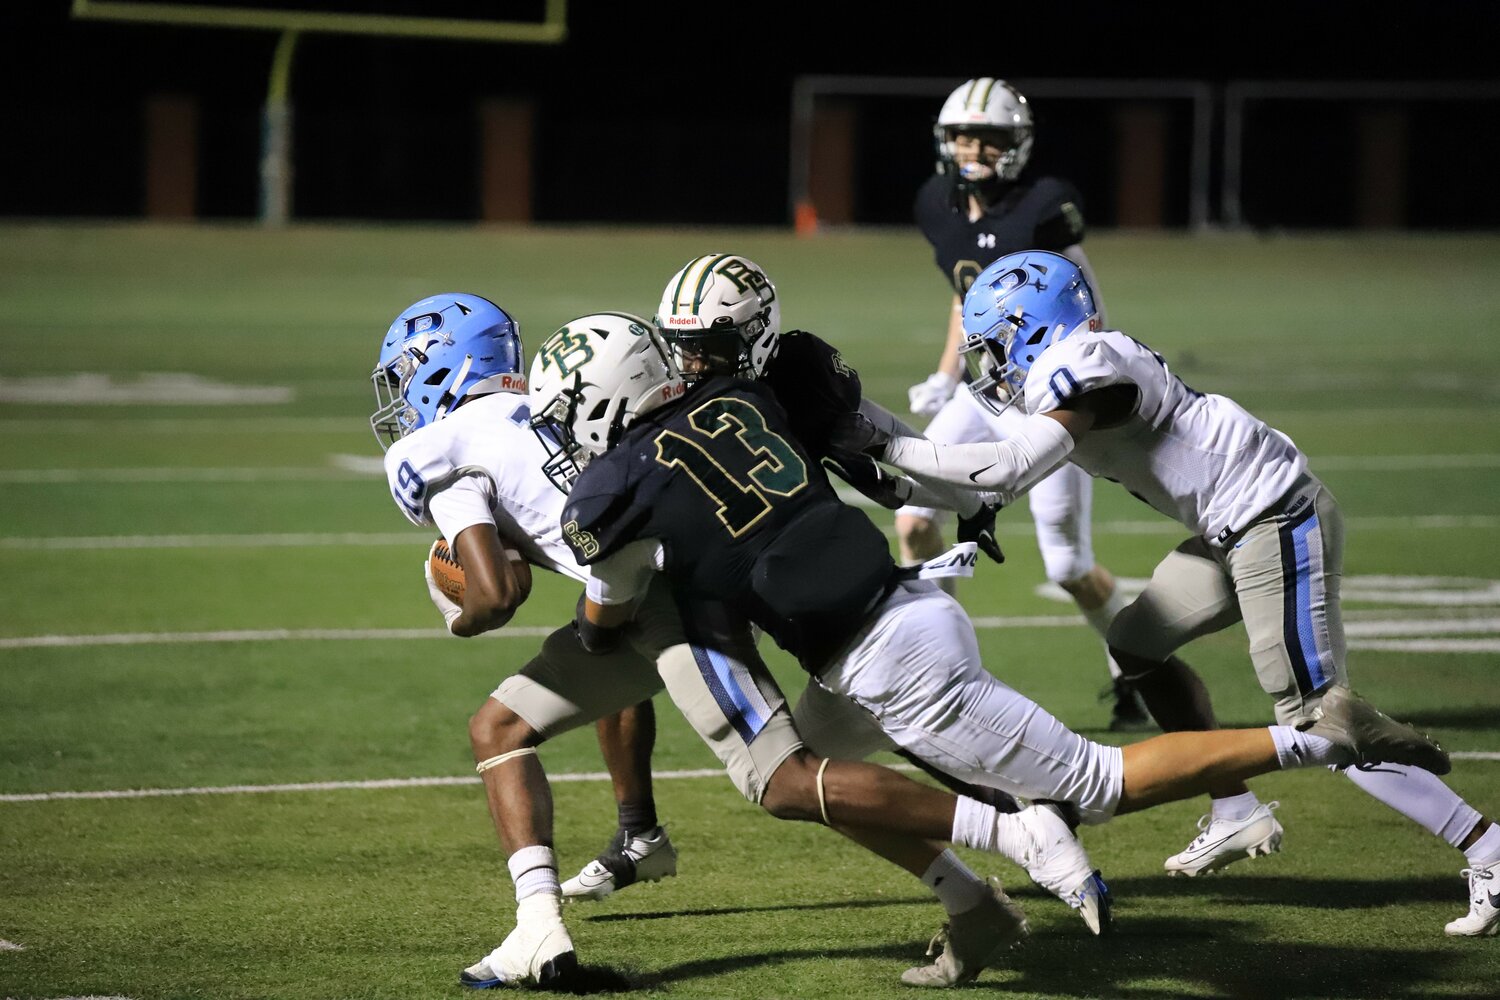 The River Bluff defense picked up a huge stop late in the game during their 29-28 win over Dorman.